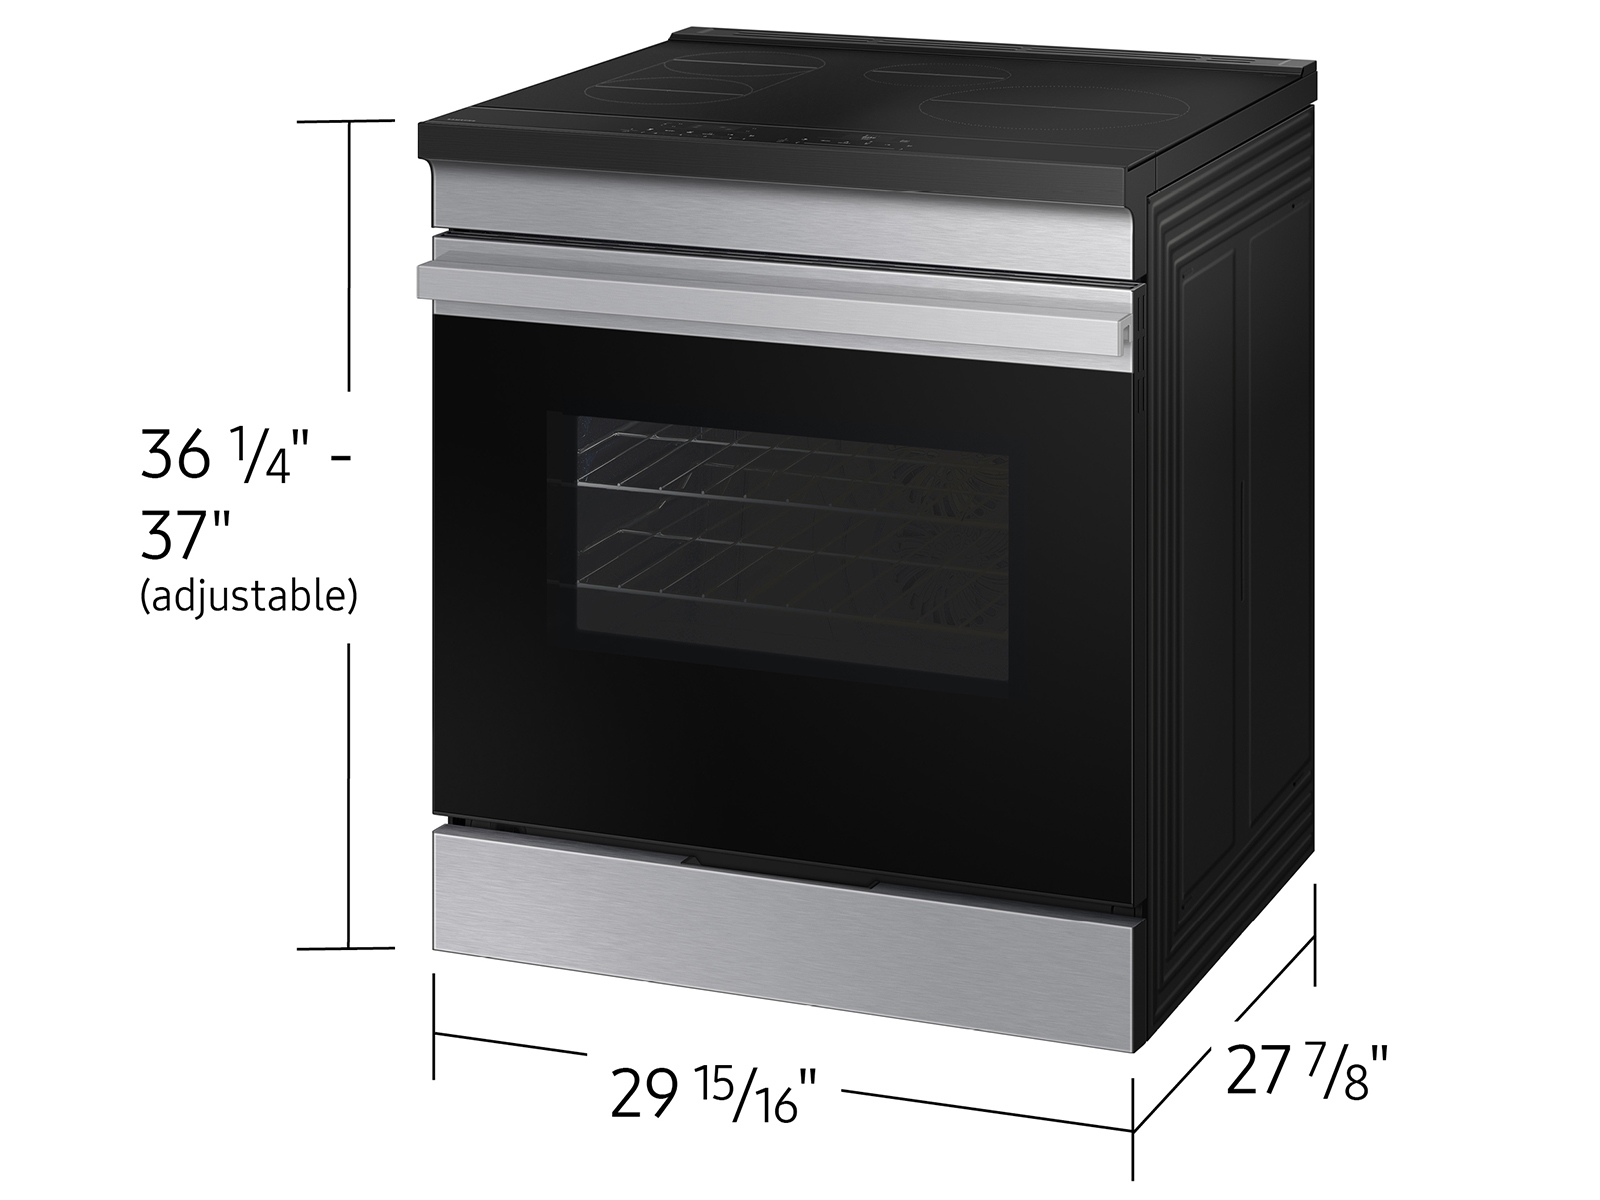 Thumbnail image of Bespoke 6.3 cu. ft. Smart Slide-In Induction Range with Anti-Scratch Glass Cooktop in Stainless Steel